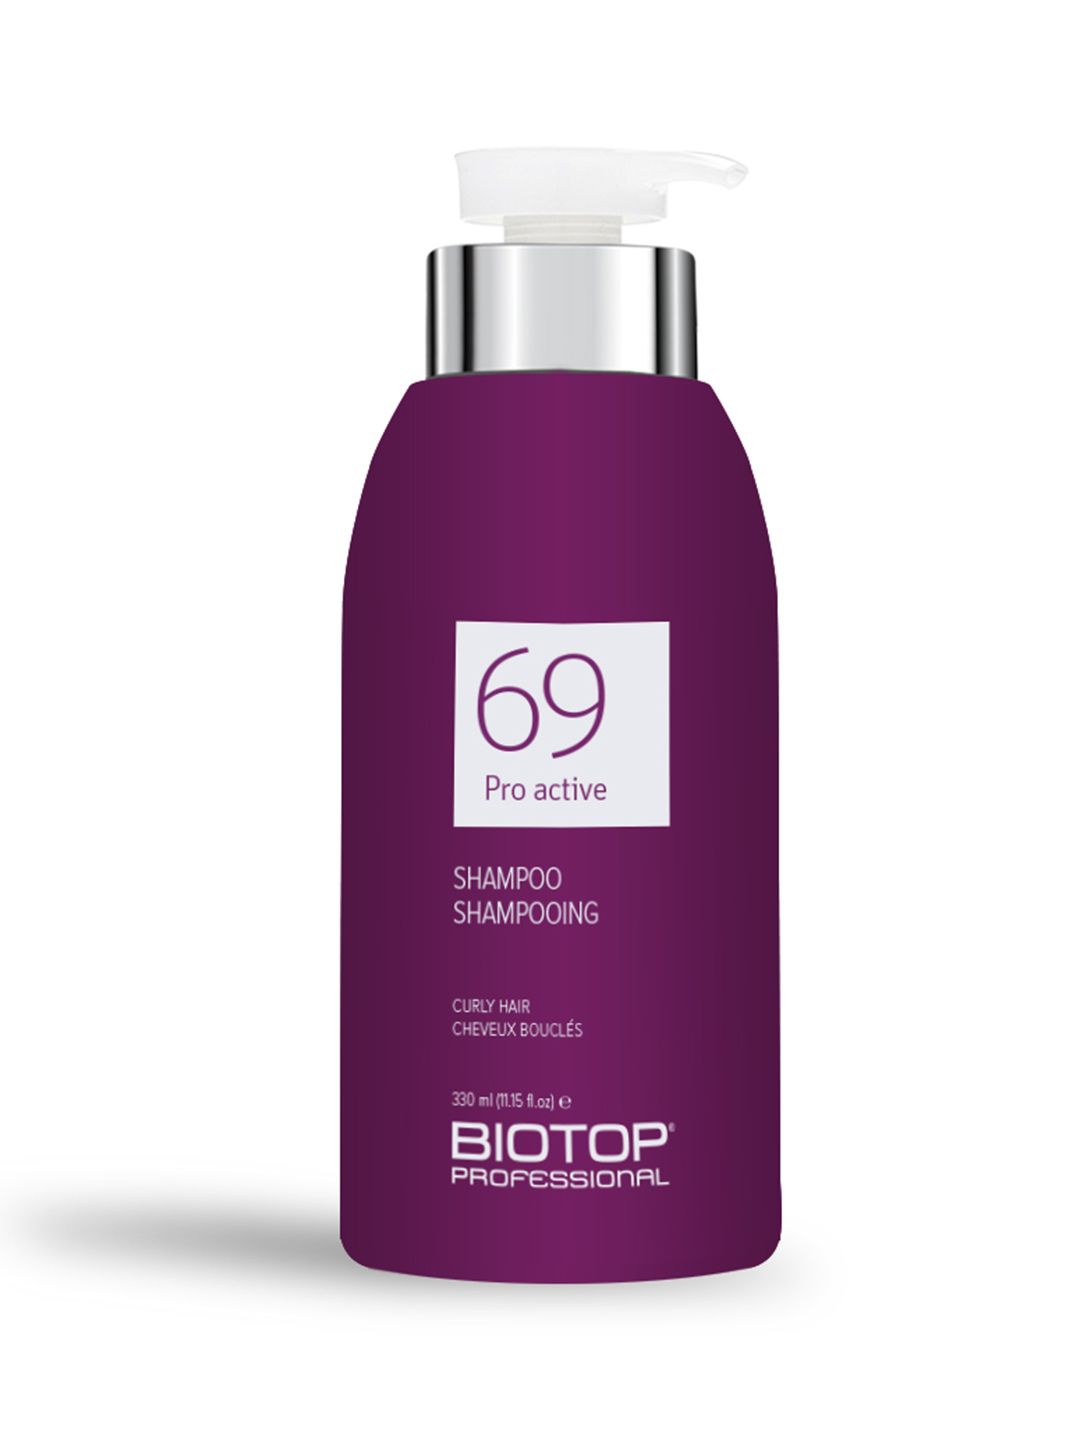 BIOTOP PROFESSIONAL 69 Curly Hair Shampoo 330 ml Price in India